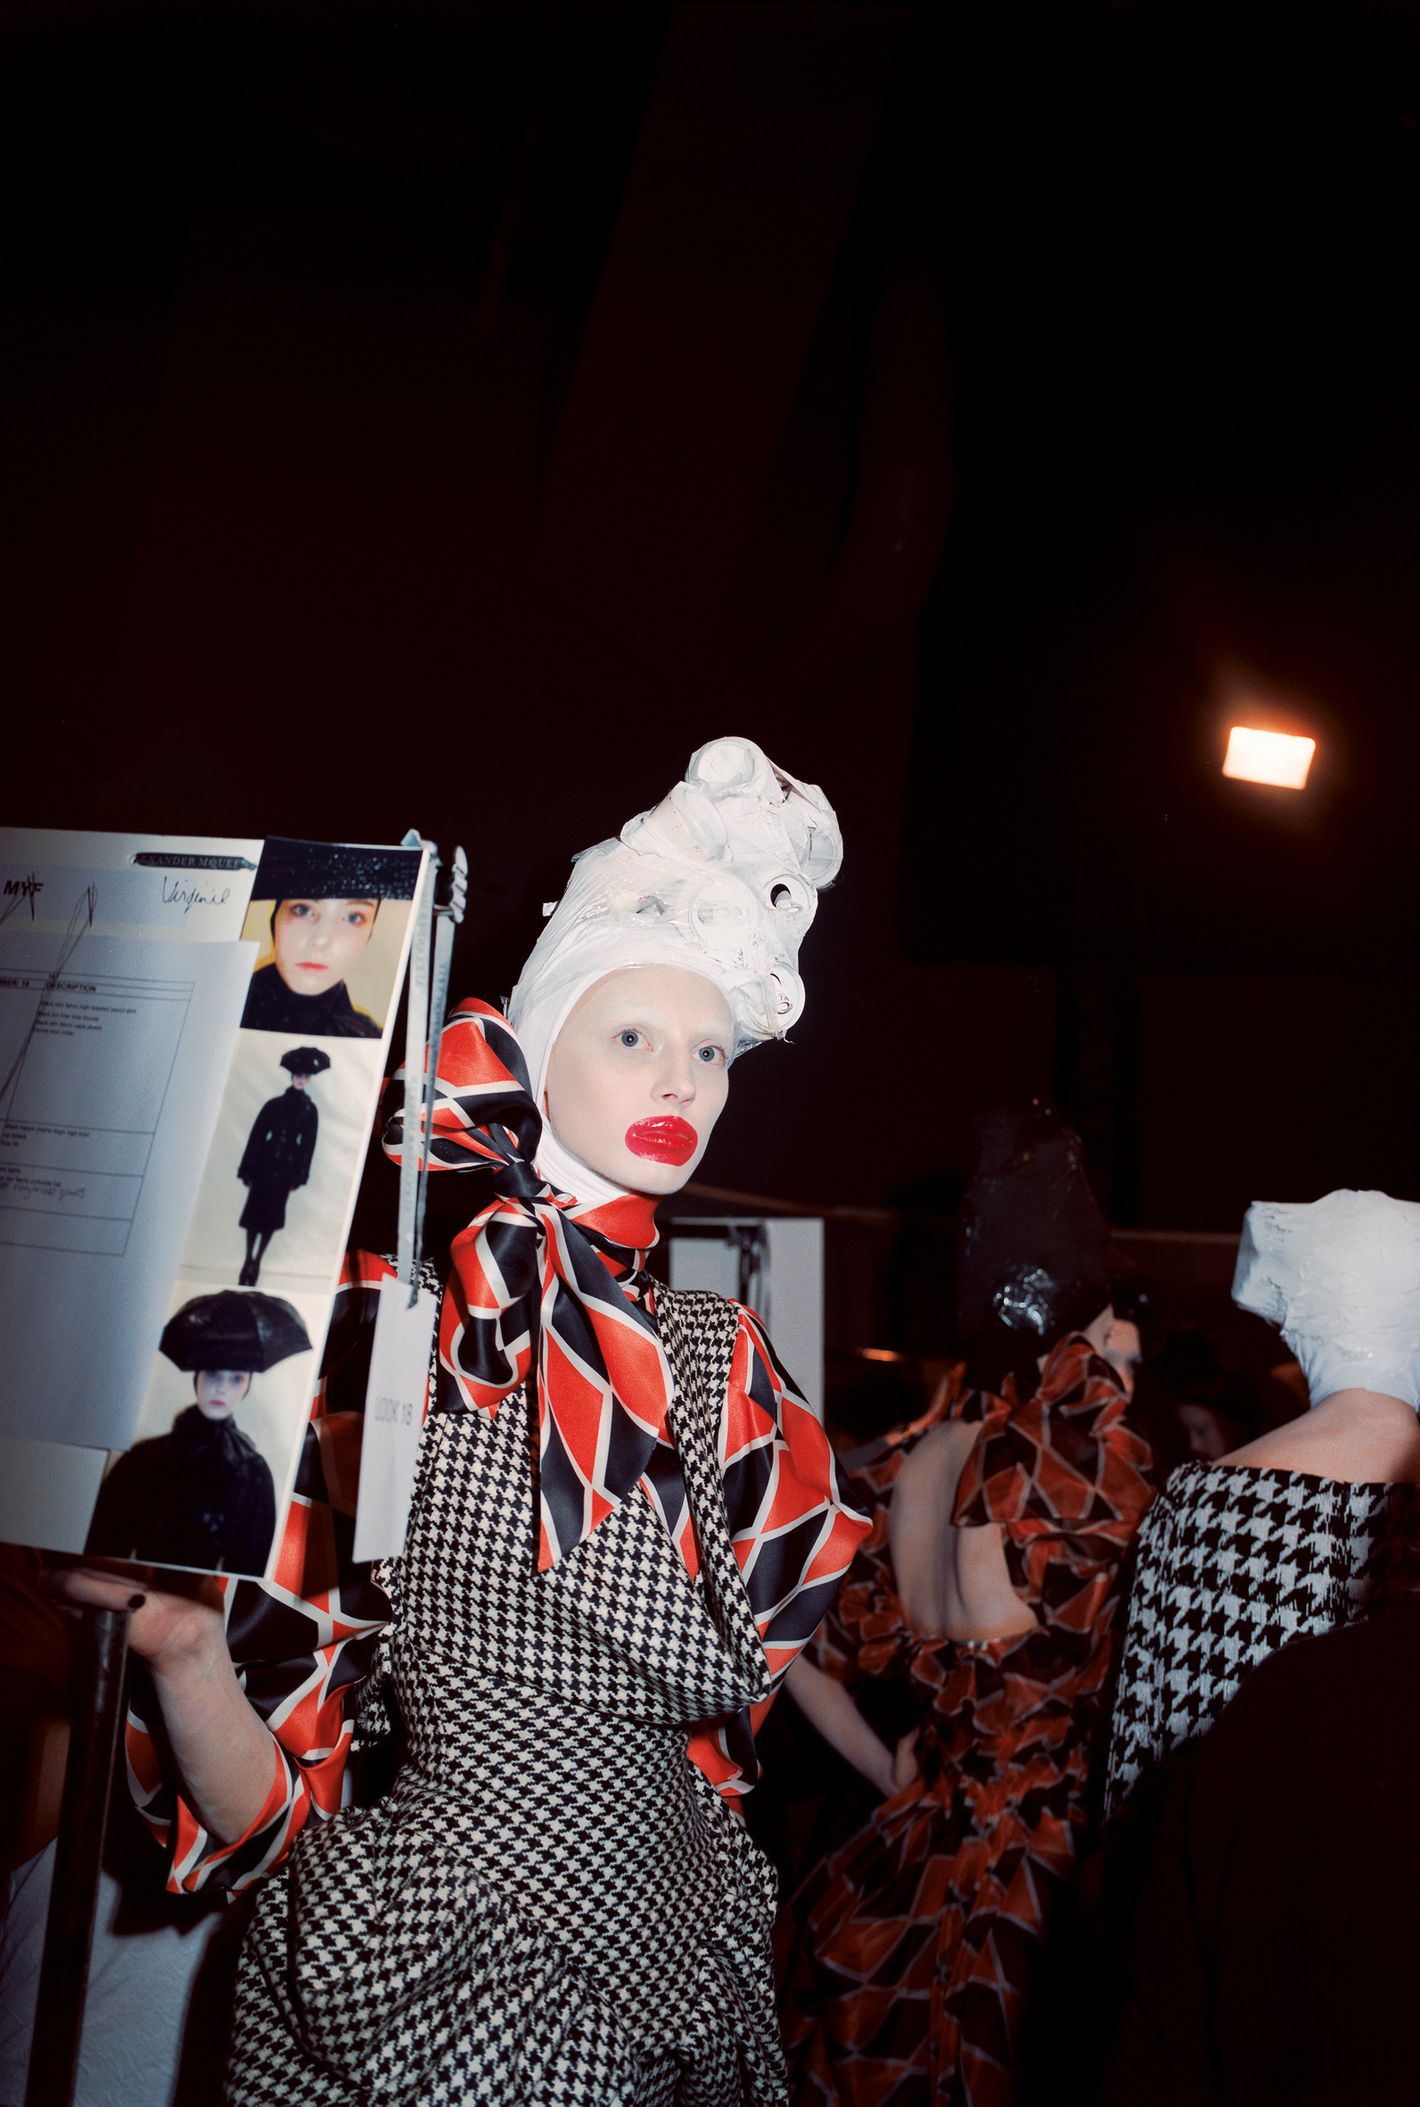 Behind the Scenes at an Iconic McQueen Show